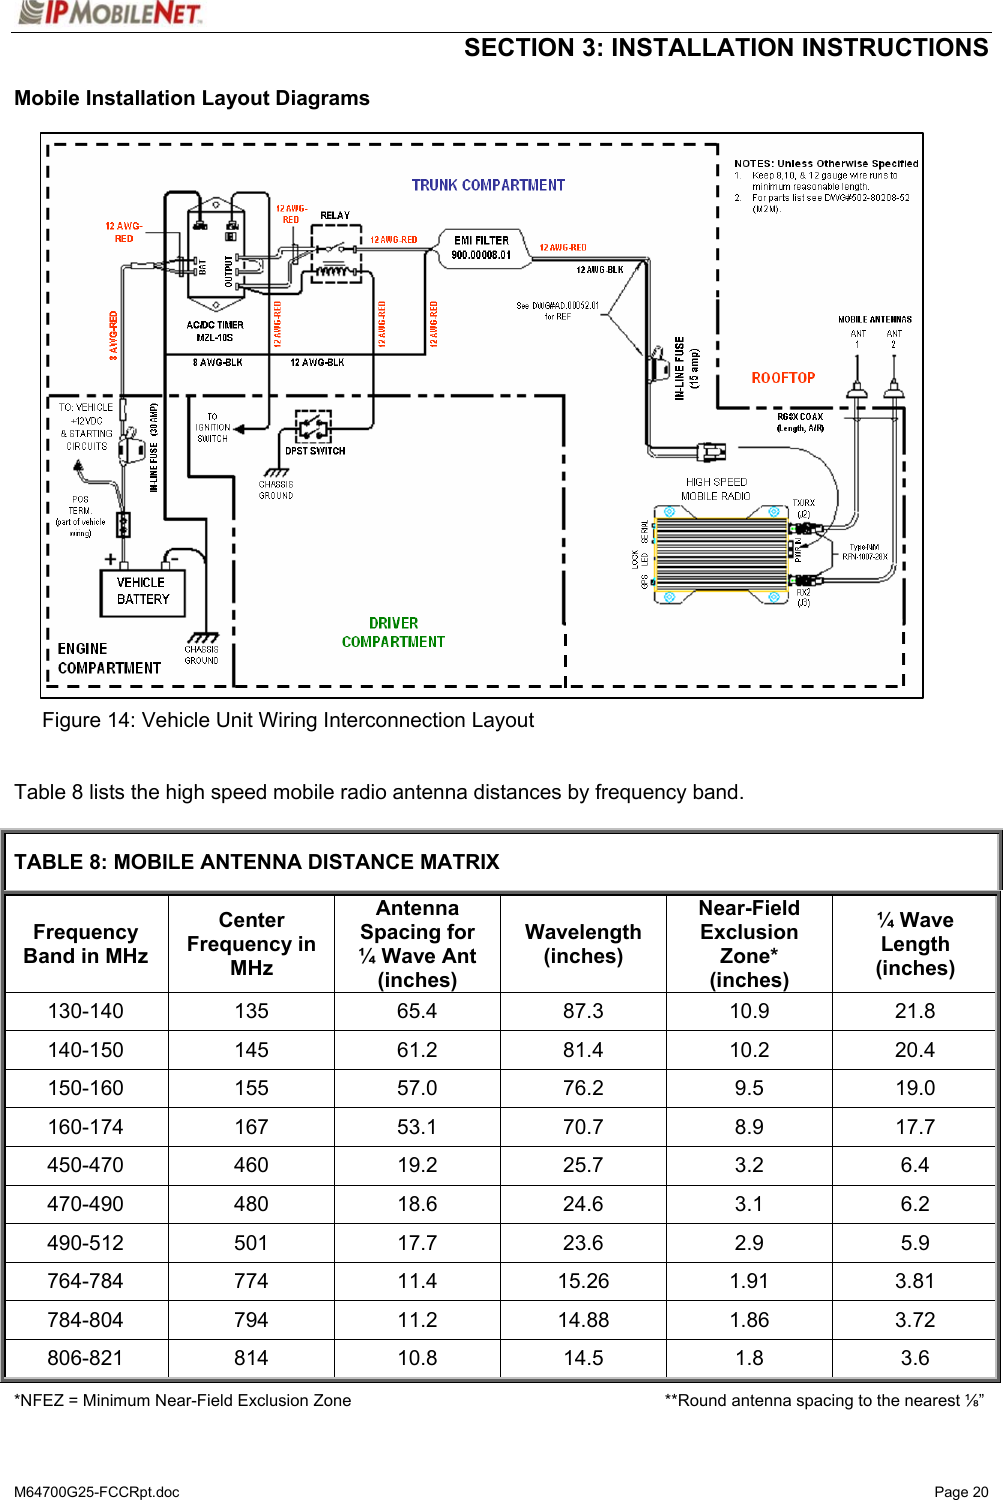  SECTION 3: INSTALLATION INSTRUCTIONS  M64700G25-FCCRpt.doc   Page 20 Mobile Installation Layout Diagrams                              Figure 14: Vehicle Unit Wiring Interconnection Layout   Table 8 lists the high speed mobile radio antenna distances by frequency band.  TABLE 8: MOBILE ANTENNA DISTANCE MATRIX Frequency Band in MHz Center Frequency in MHz Antenna Spacing for ¼ Wave Ant (inches) Wavelength (inches) Near-Field Exclusion Zone* (inches) ¼ Wave Length (inches) 130-140 135  65.4  87.3  10.9  21.8 140-150 145  61.2  81.4  10.2  20.4 150-160 155 57.0 76.2 9.5 19.0 160-174 167 53.1 70.7 8.9 17.7 450-470 460  19.2  25.7  3.2  6.4 470-490 480  18.6  24.6  3.1  6.2 490-512 501  17.7  23.6  2.9  5.9 764-784 774  11.4  15.26  1.91  3.81 784-804 794  11.2  14.88  1.86  3.72 806-821 814  10.8  14.5  1.8  3.6 *NFEZ = Minimum Near-Field Exclusion Zone                    **Round antenna spacing to the nearest ⅛” 